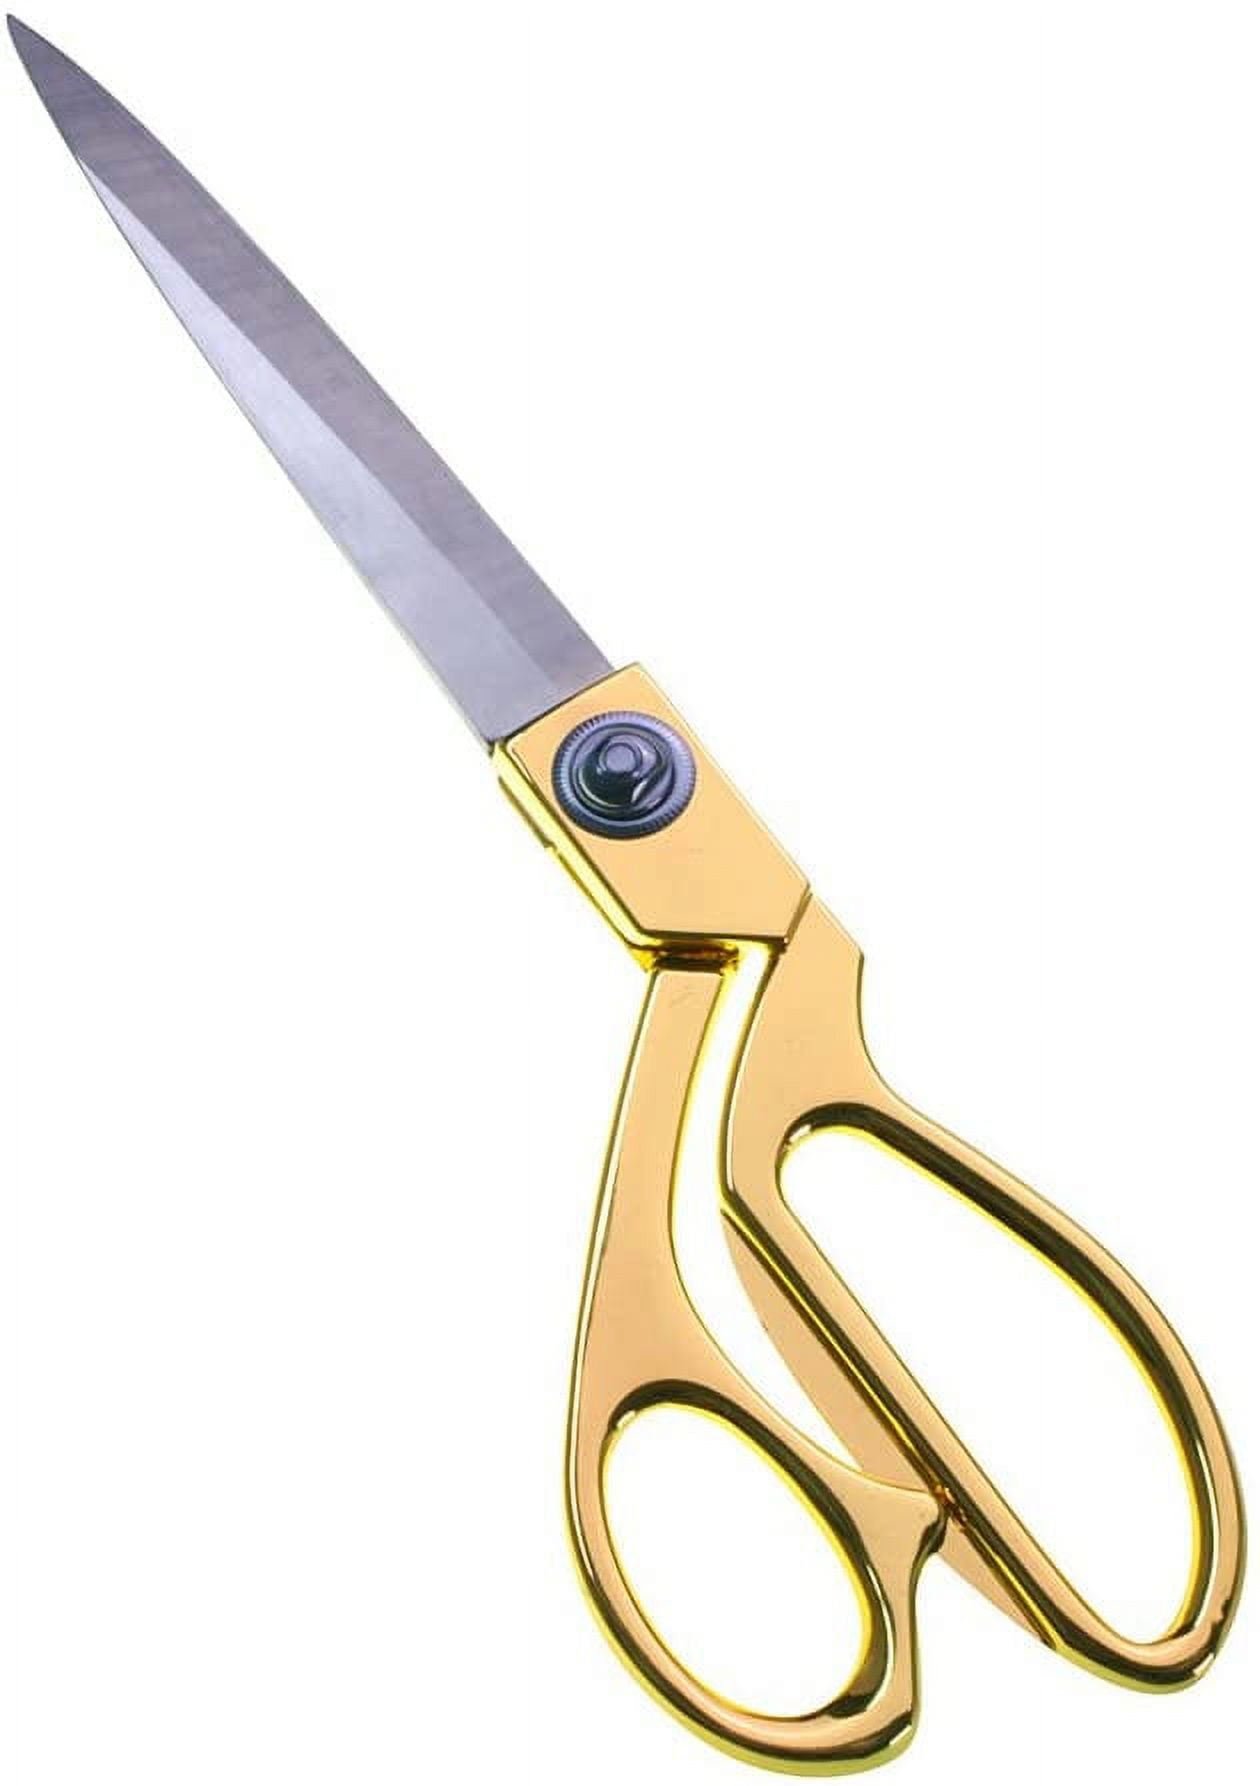 Talerluv Professional Sewing Fabric Scissors, Heavy Duty Sharp Tailor  Haberdashery Shear with Fabric Pencil, Pins, Snips, Tape Measure, Seam  Ripper